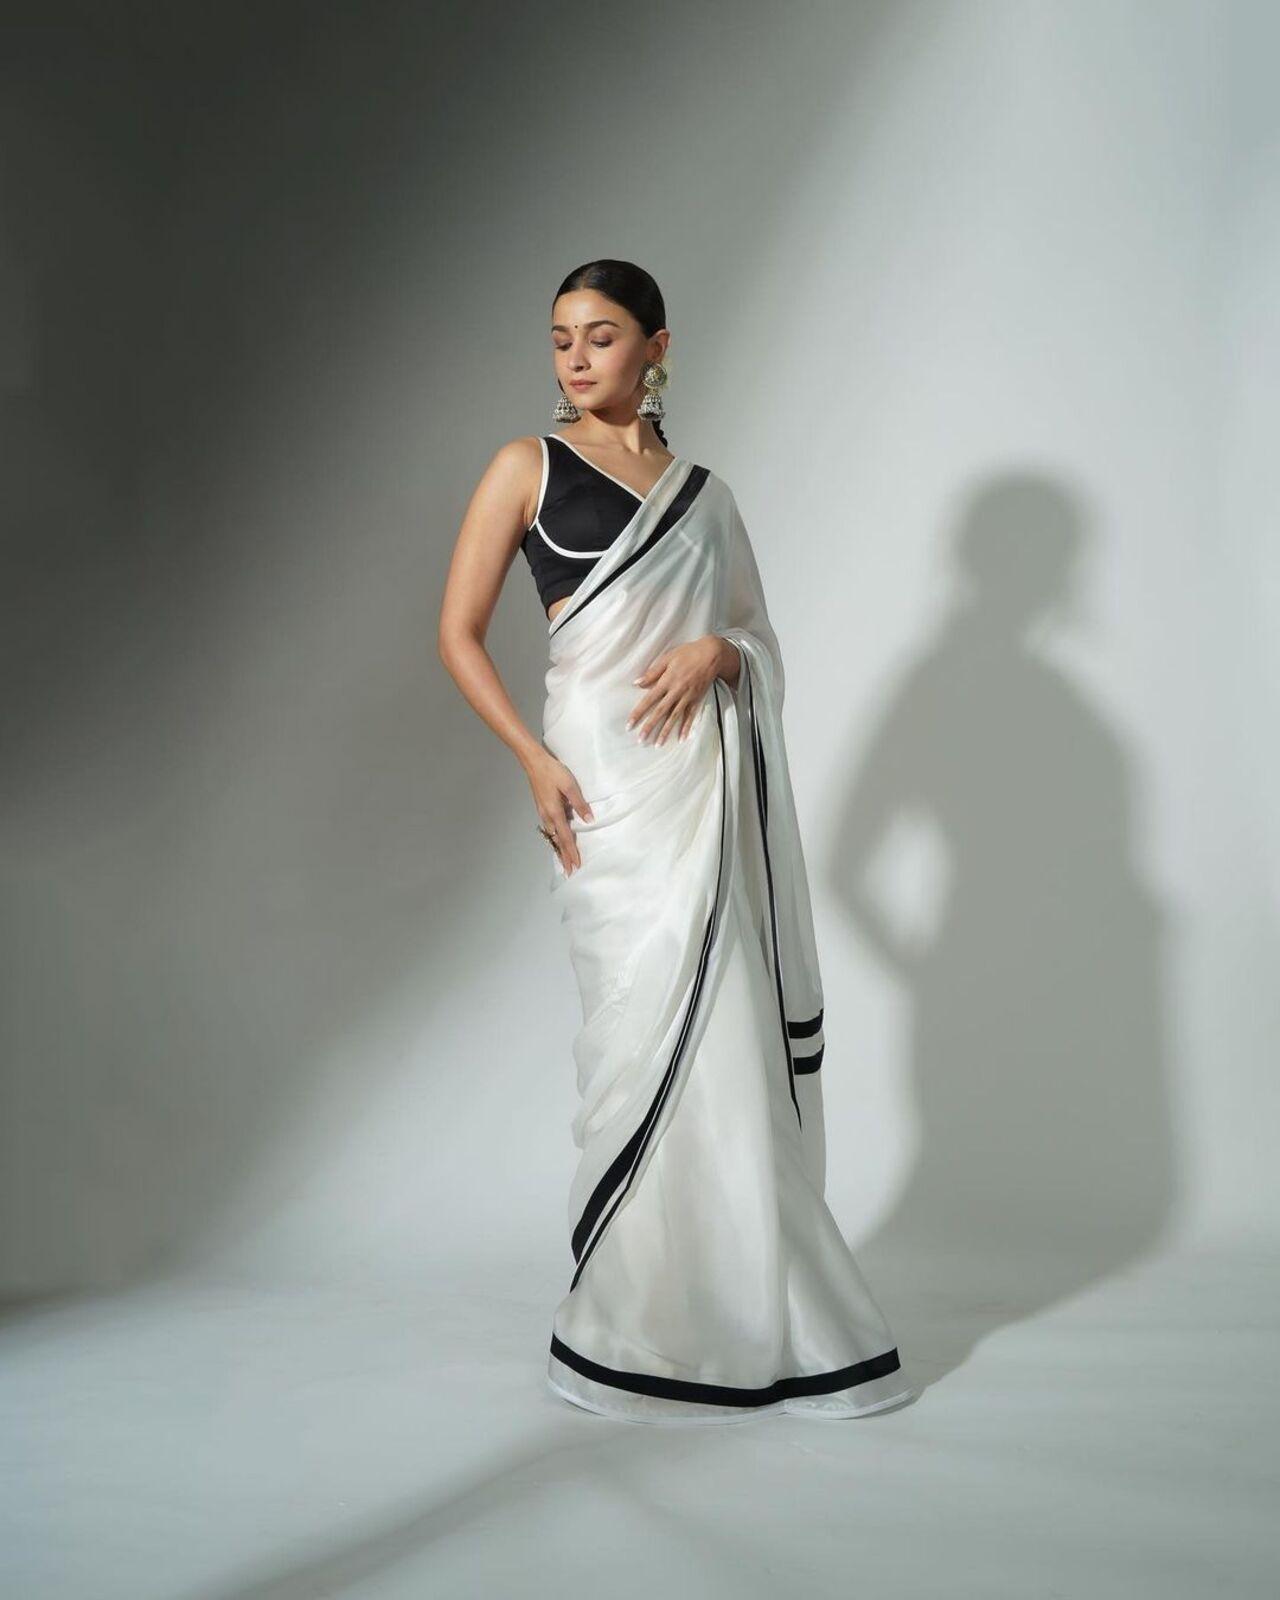 Alia Bhatt was seen in different kinds of white saree during the promotion of her film 'Gangubai Kathiawadi' as the colour white plays a significant role in the life of her character